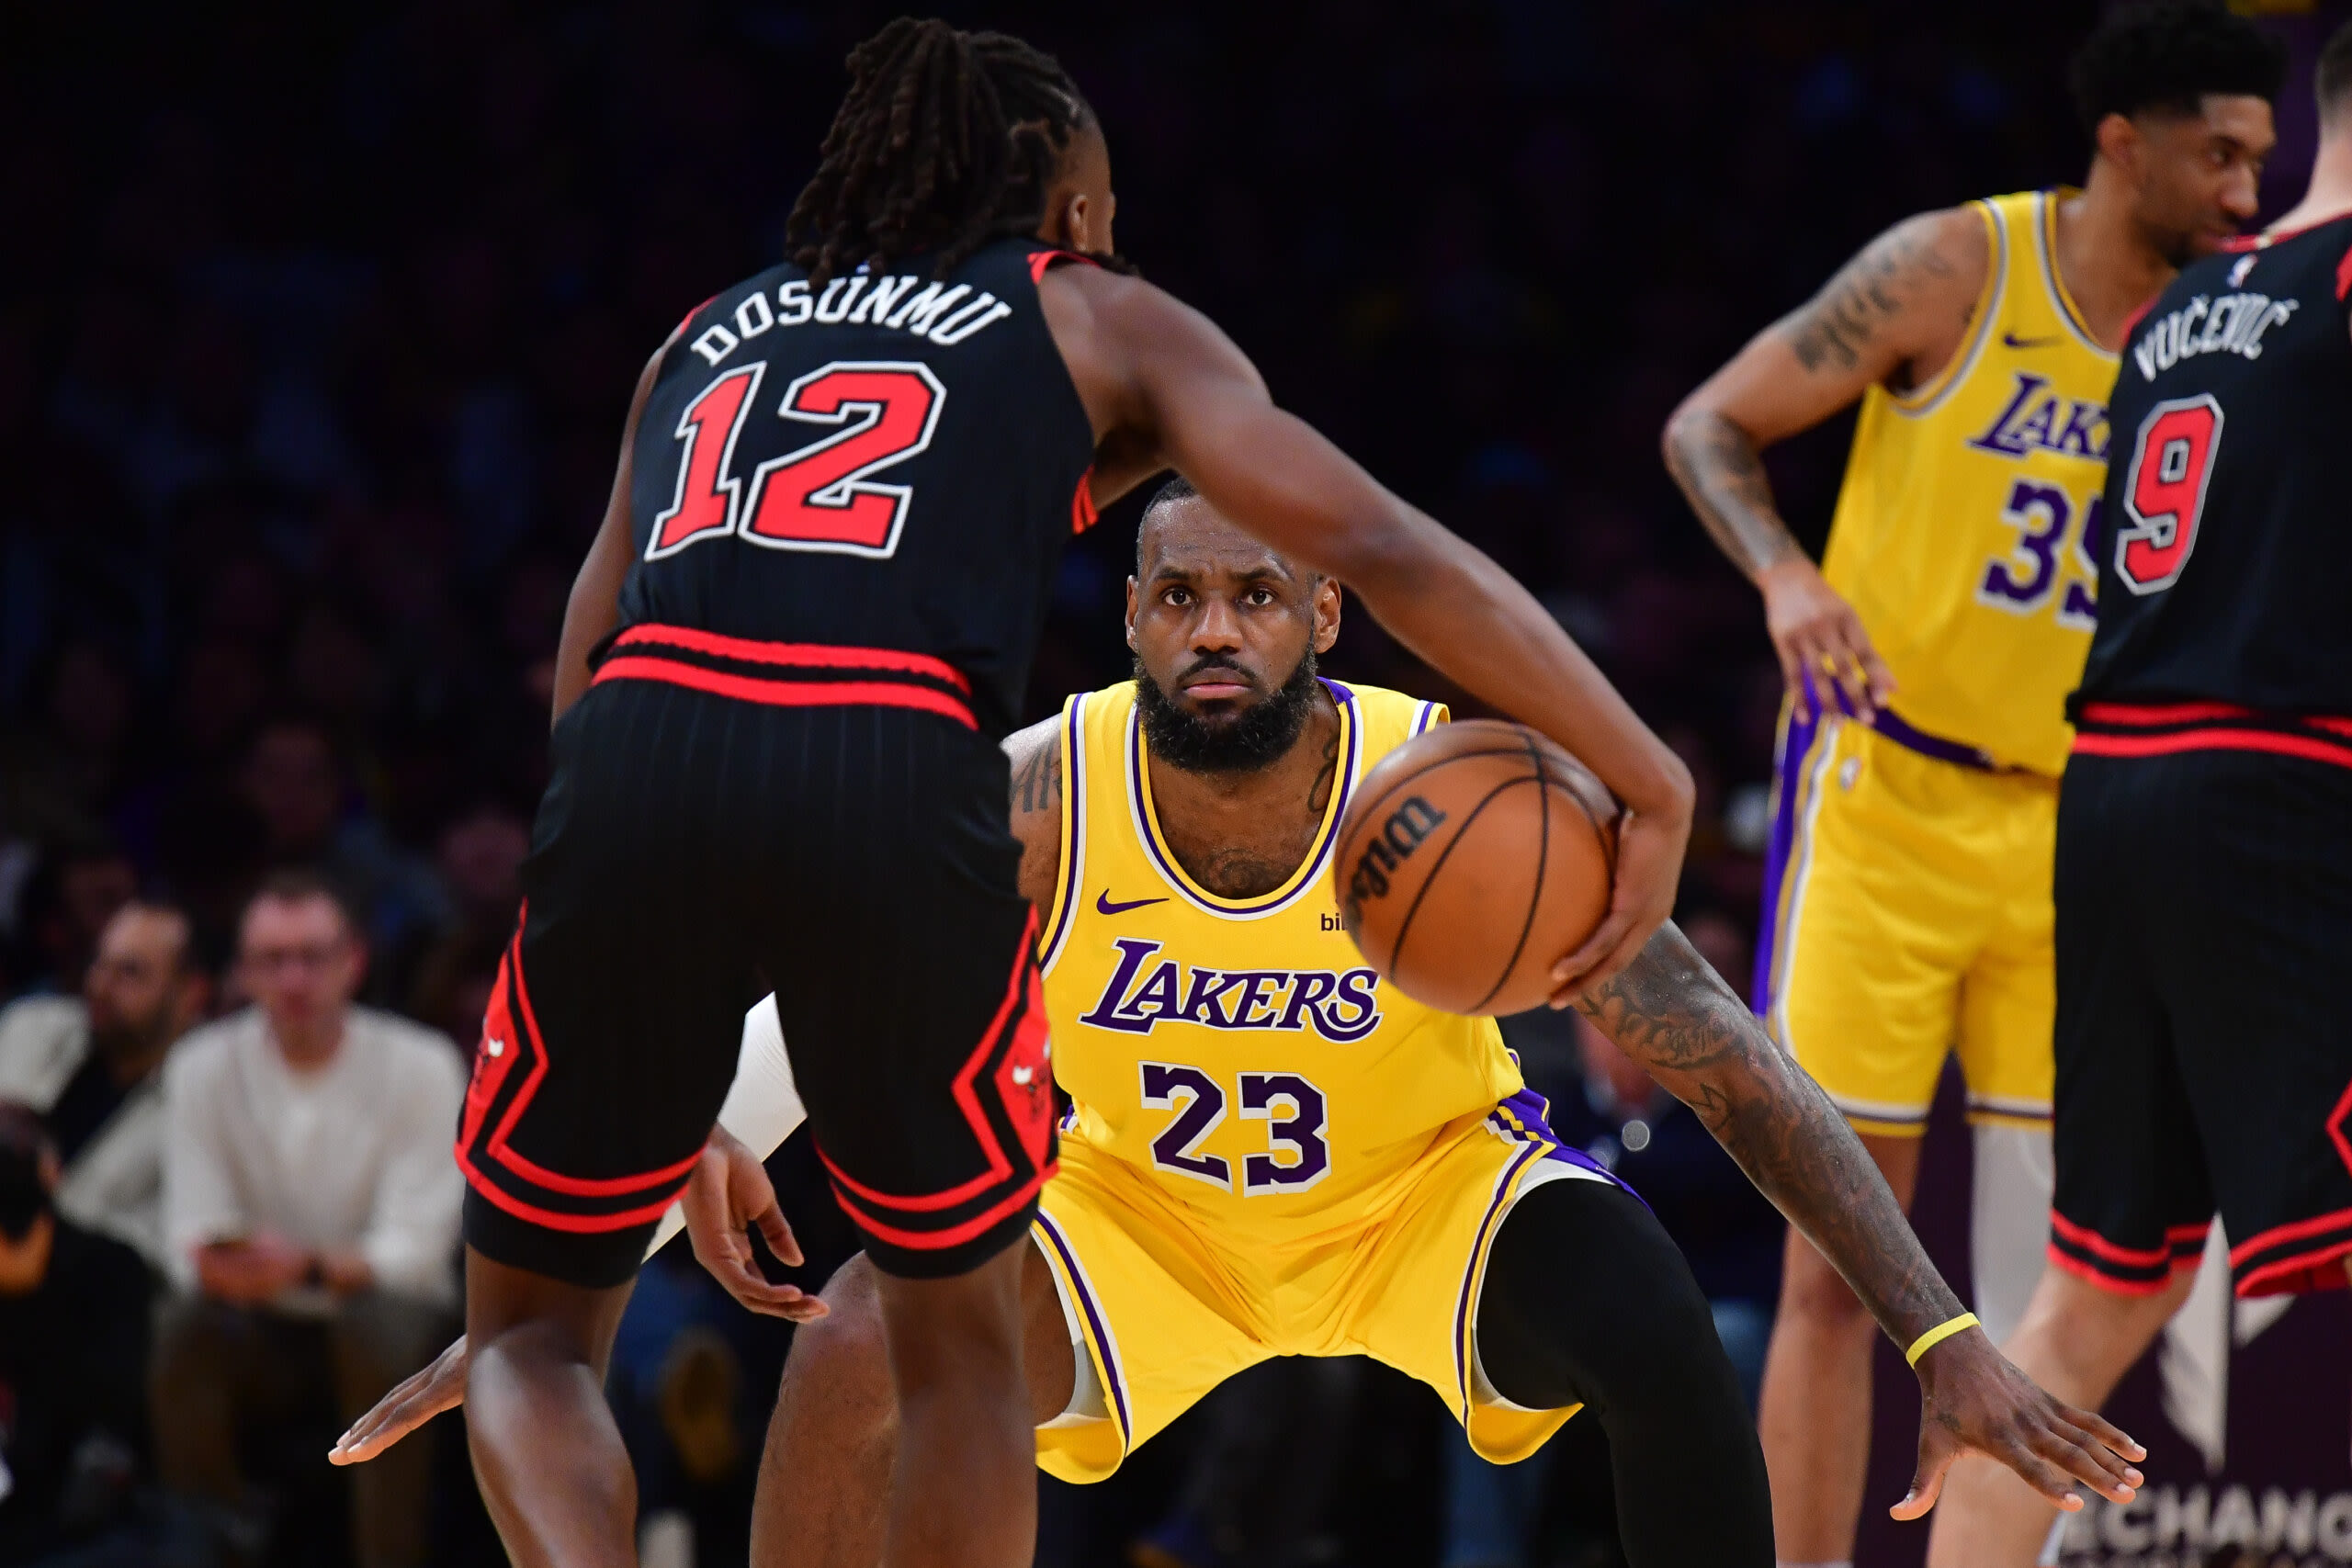 Bulls supposedly don’t want to help LeBron James, Lakers